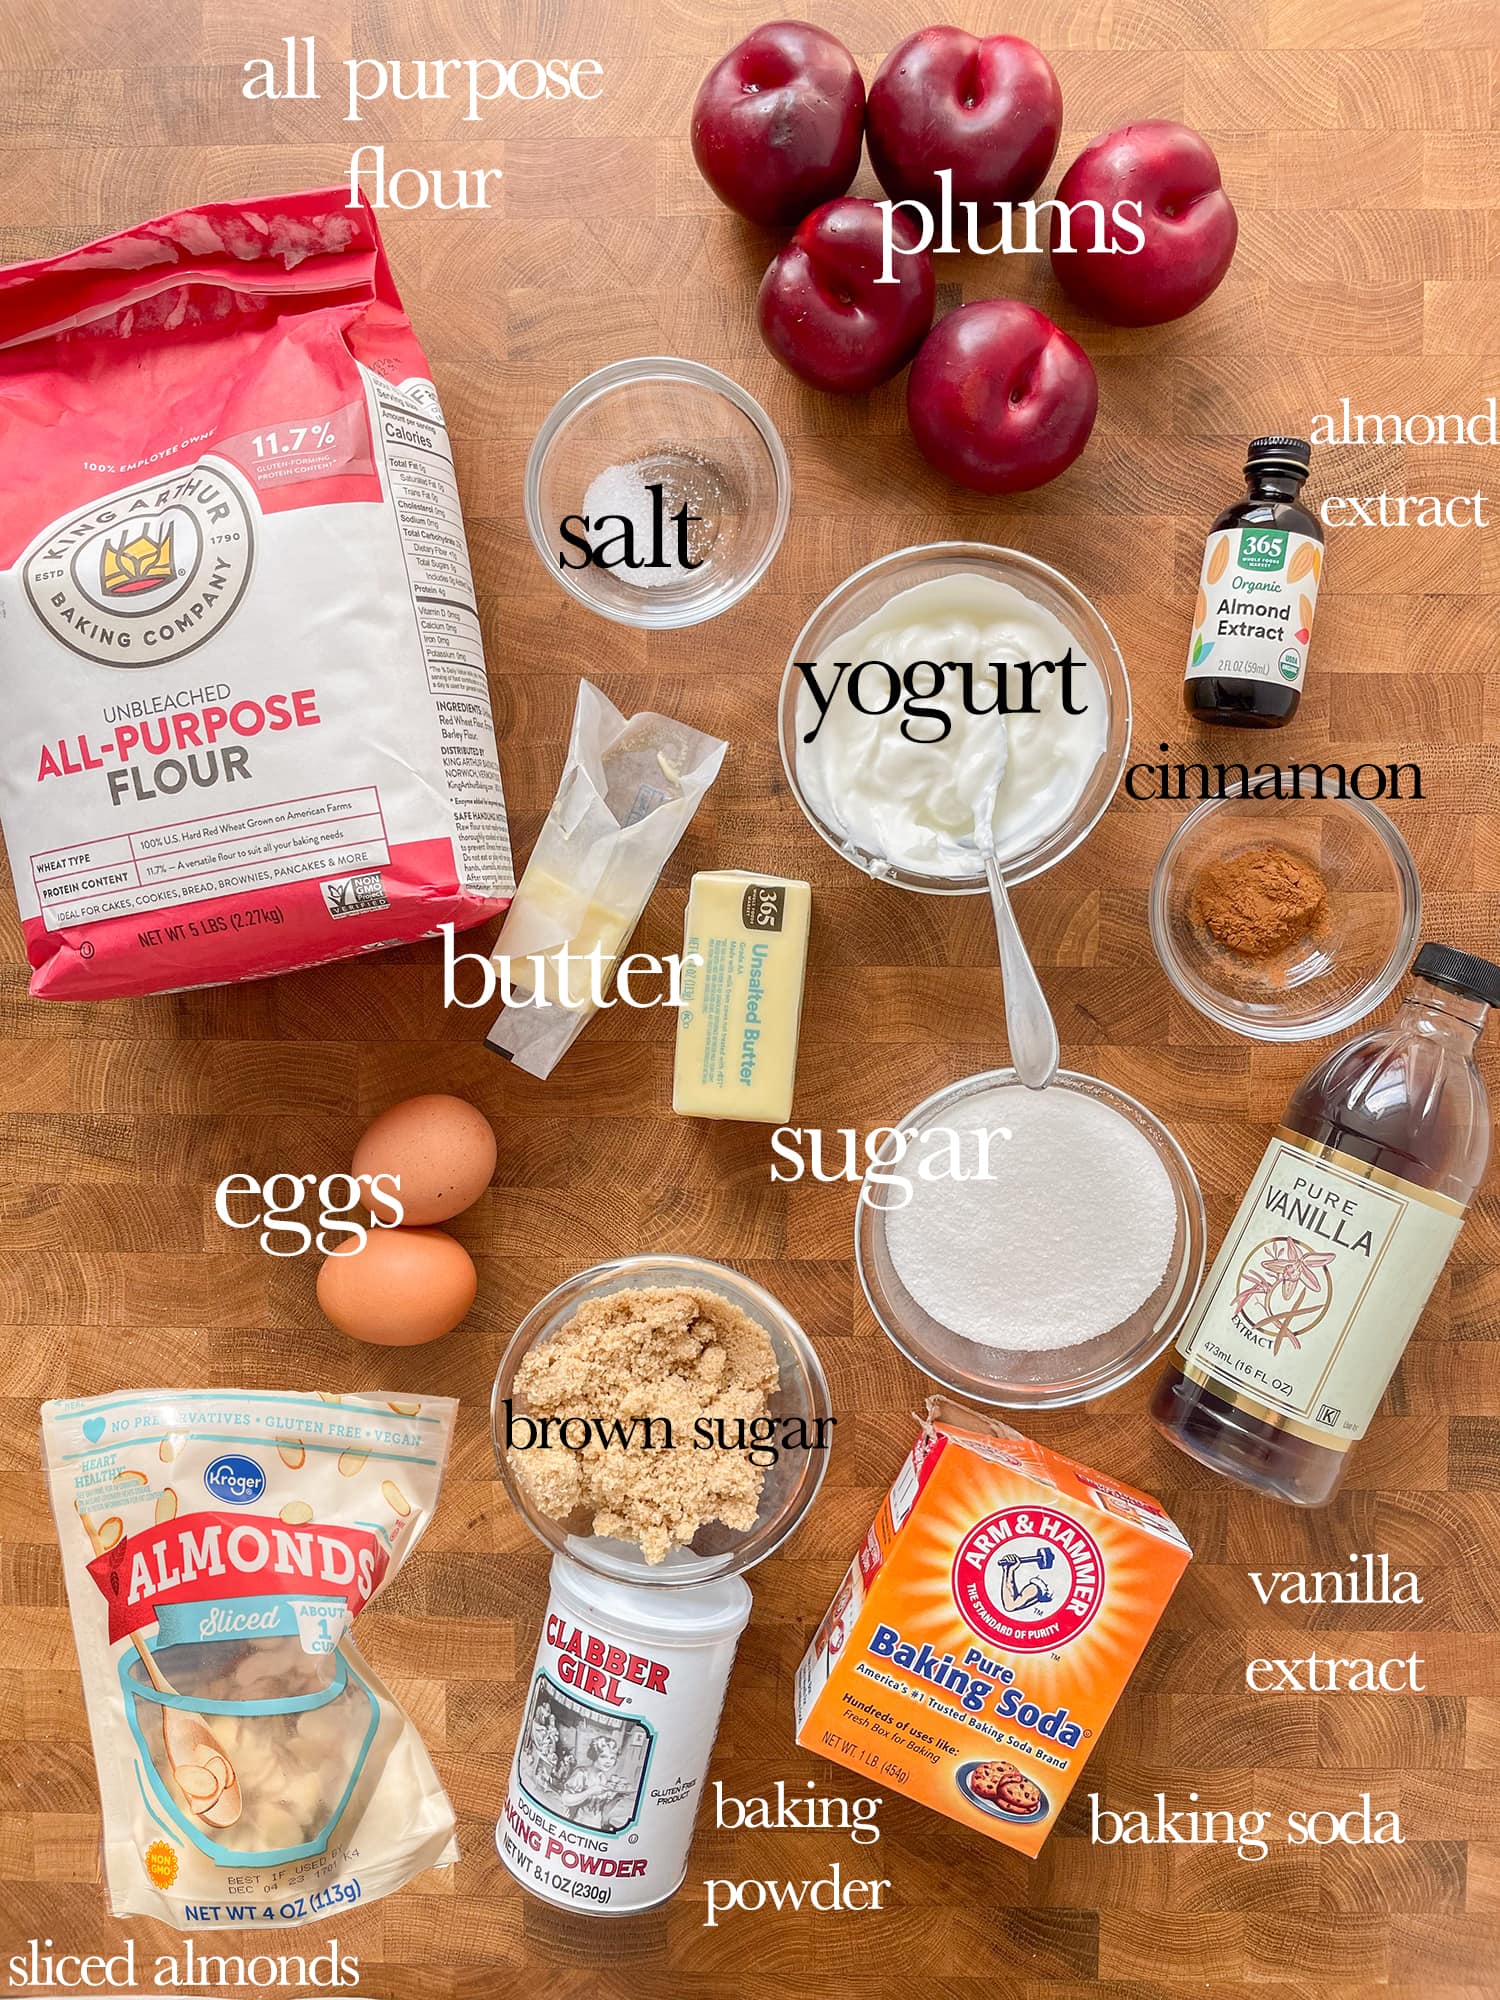 Ingredients laid out and labeled for making a plum upside down cake with  almonds. 